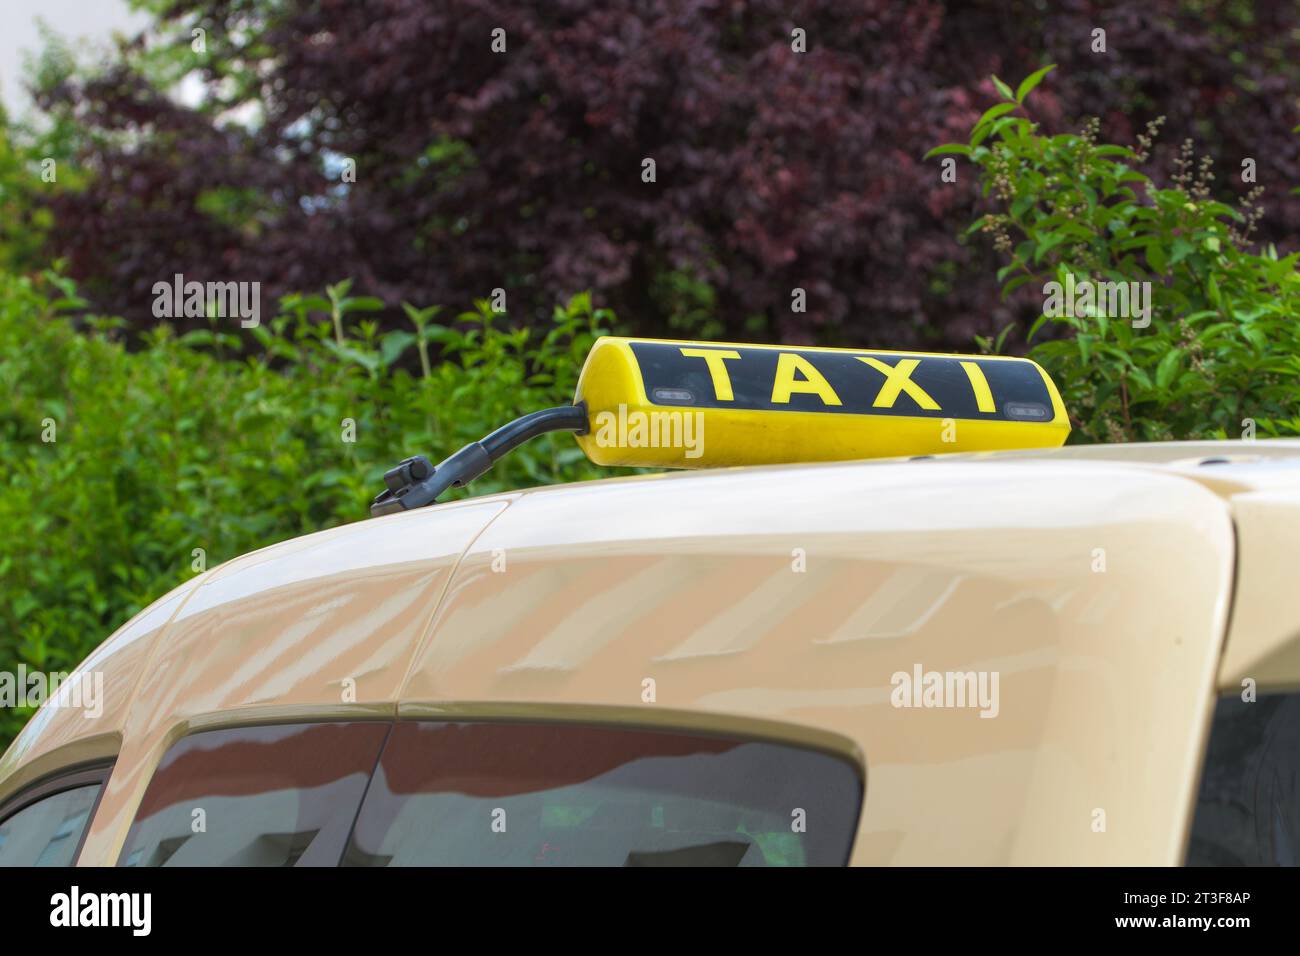 A cab sign on the roof of the car Stock Photo